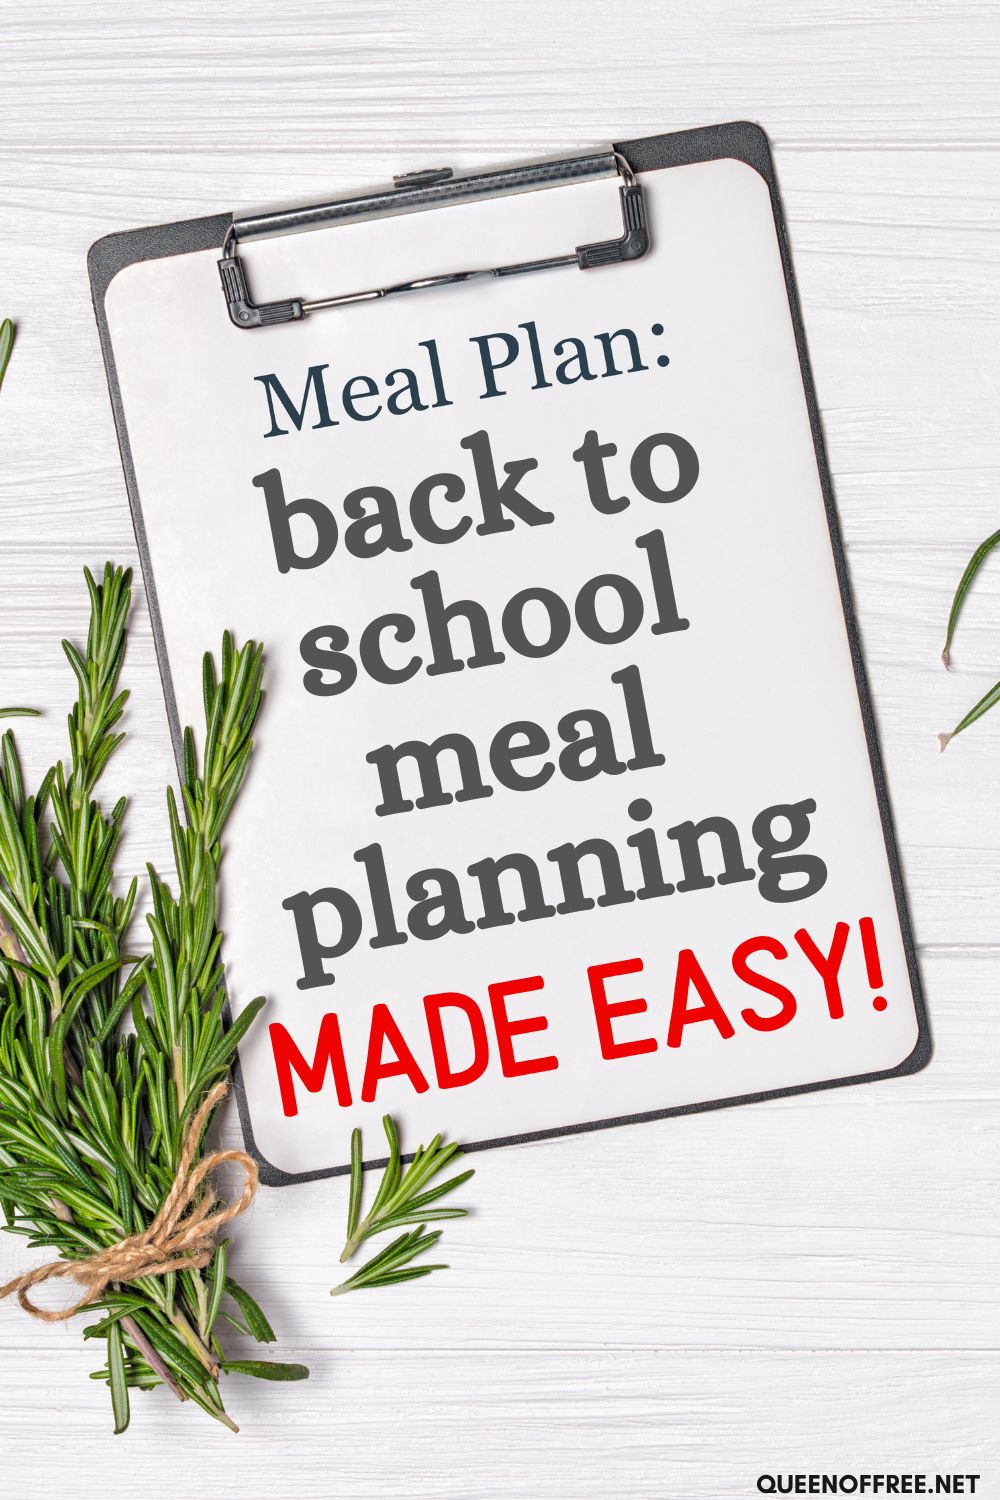 Feeling busy and overwhelmed? Get back to dinner with these back to school meal planning ideas & prep tips!